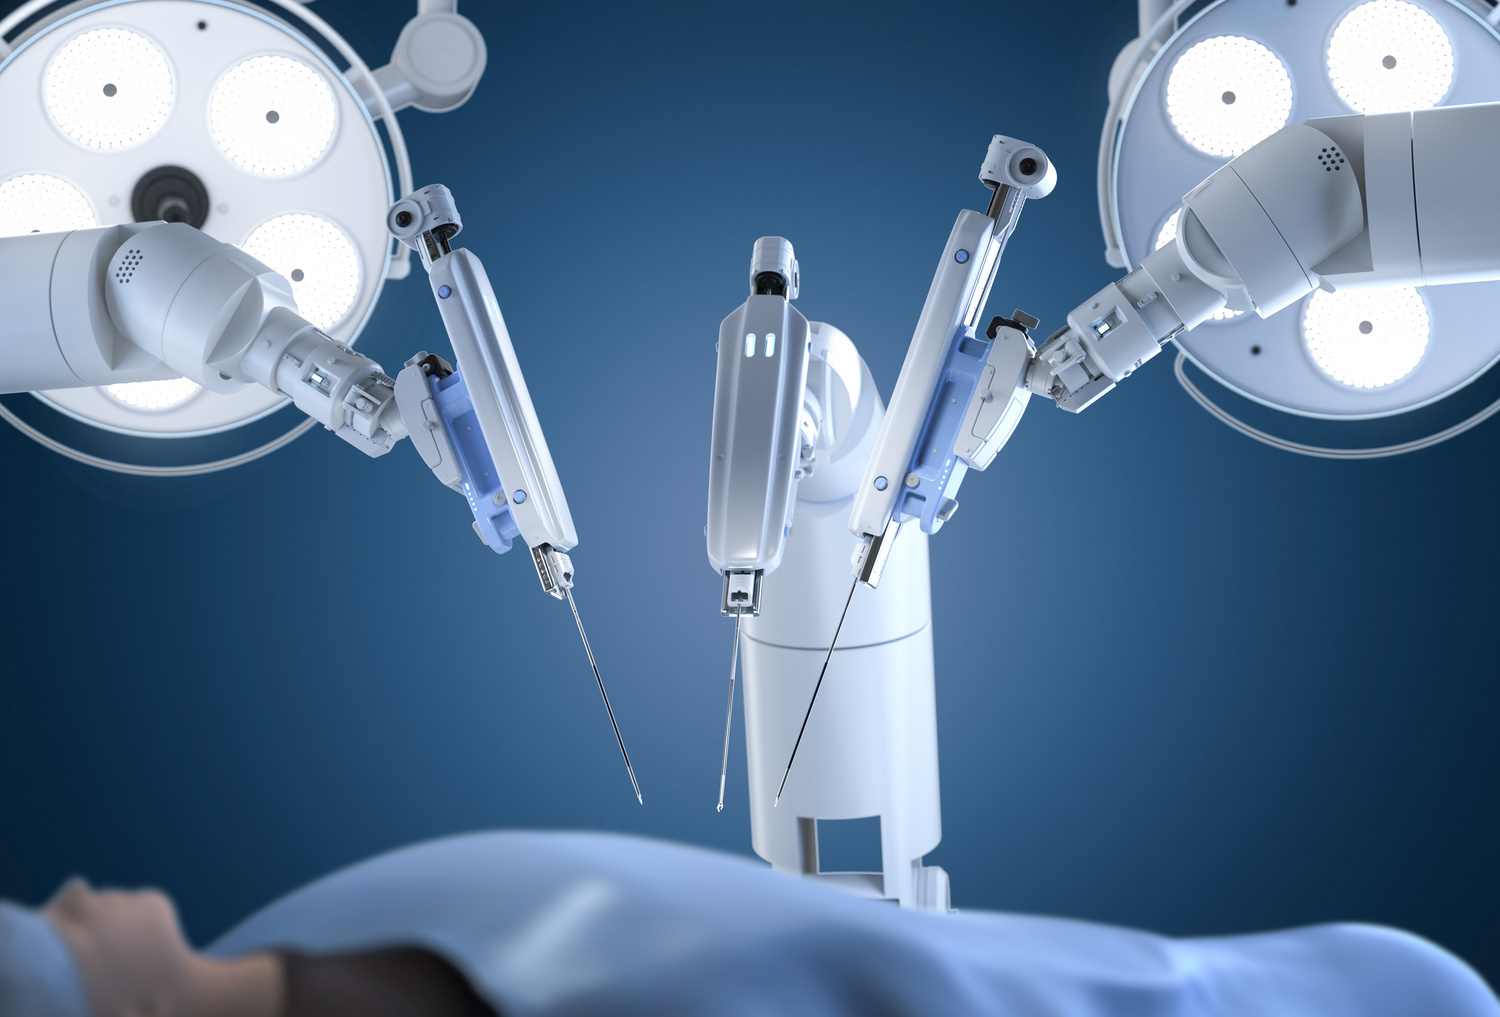 Robotic assisted surgery with mock up model in operating room